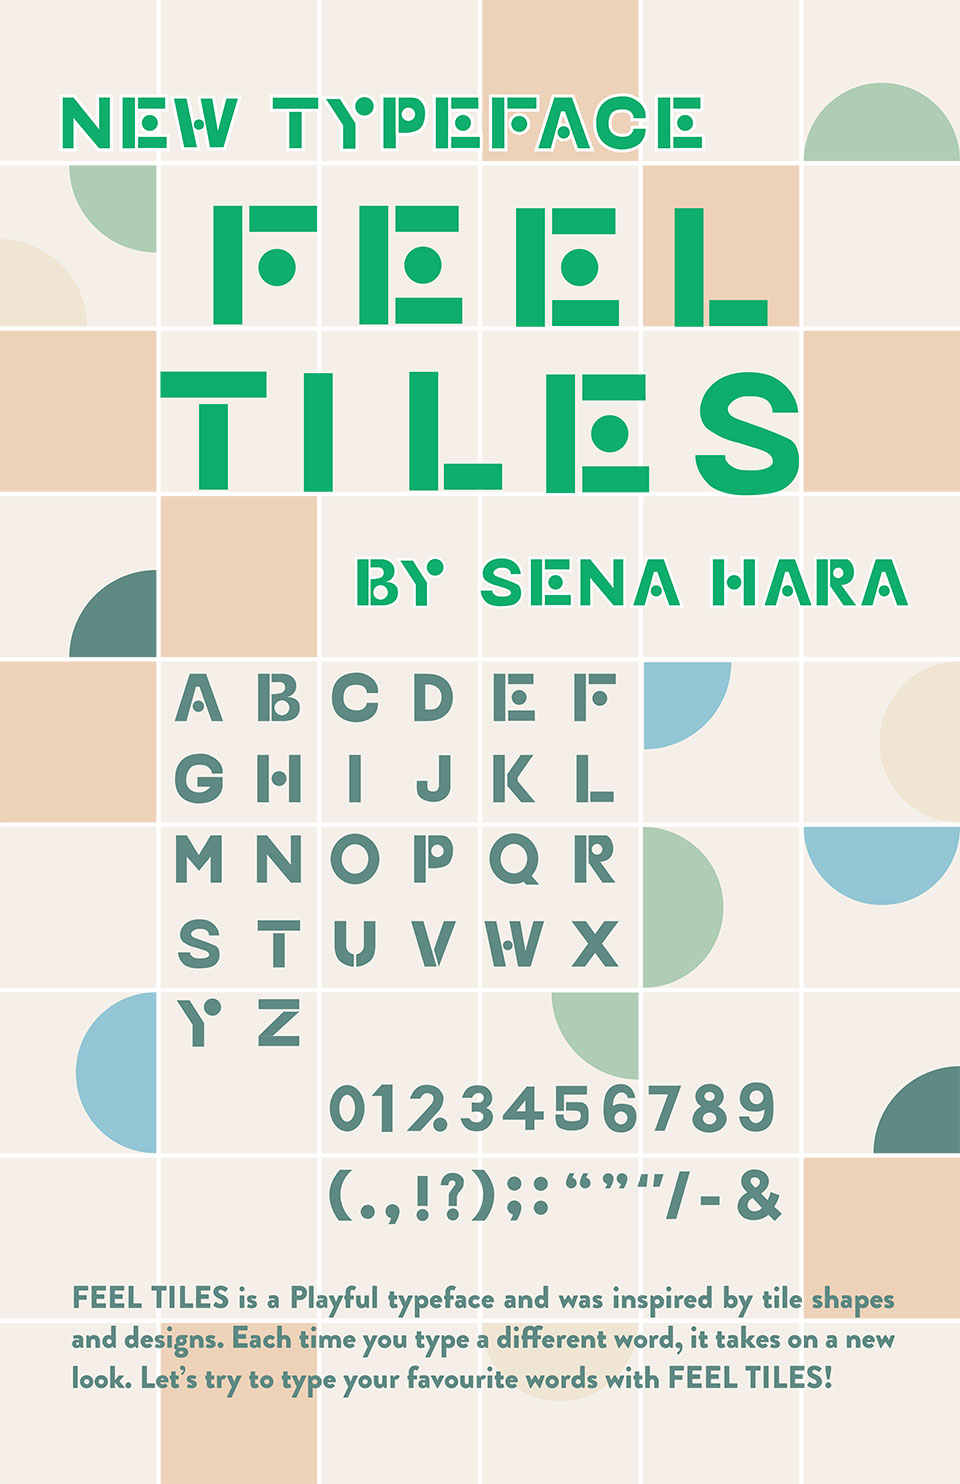 picture for the Feel tiles typeface creation project